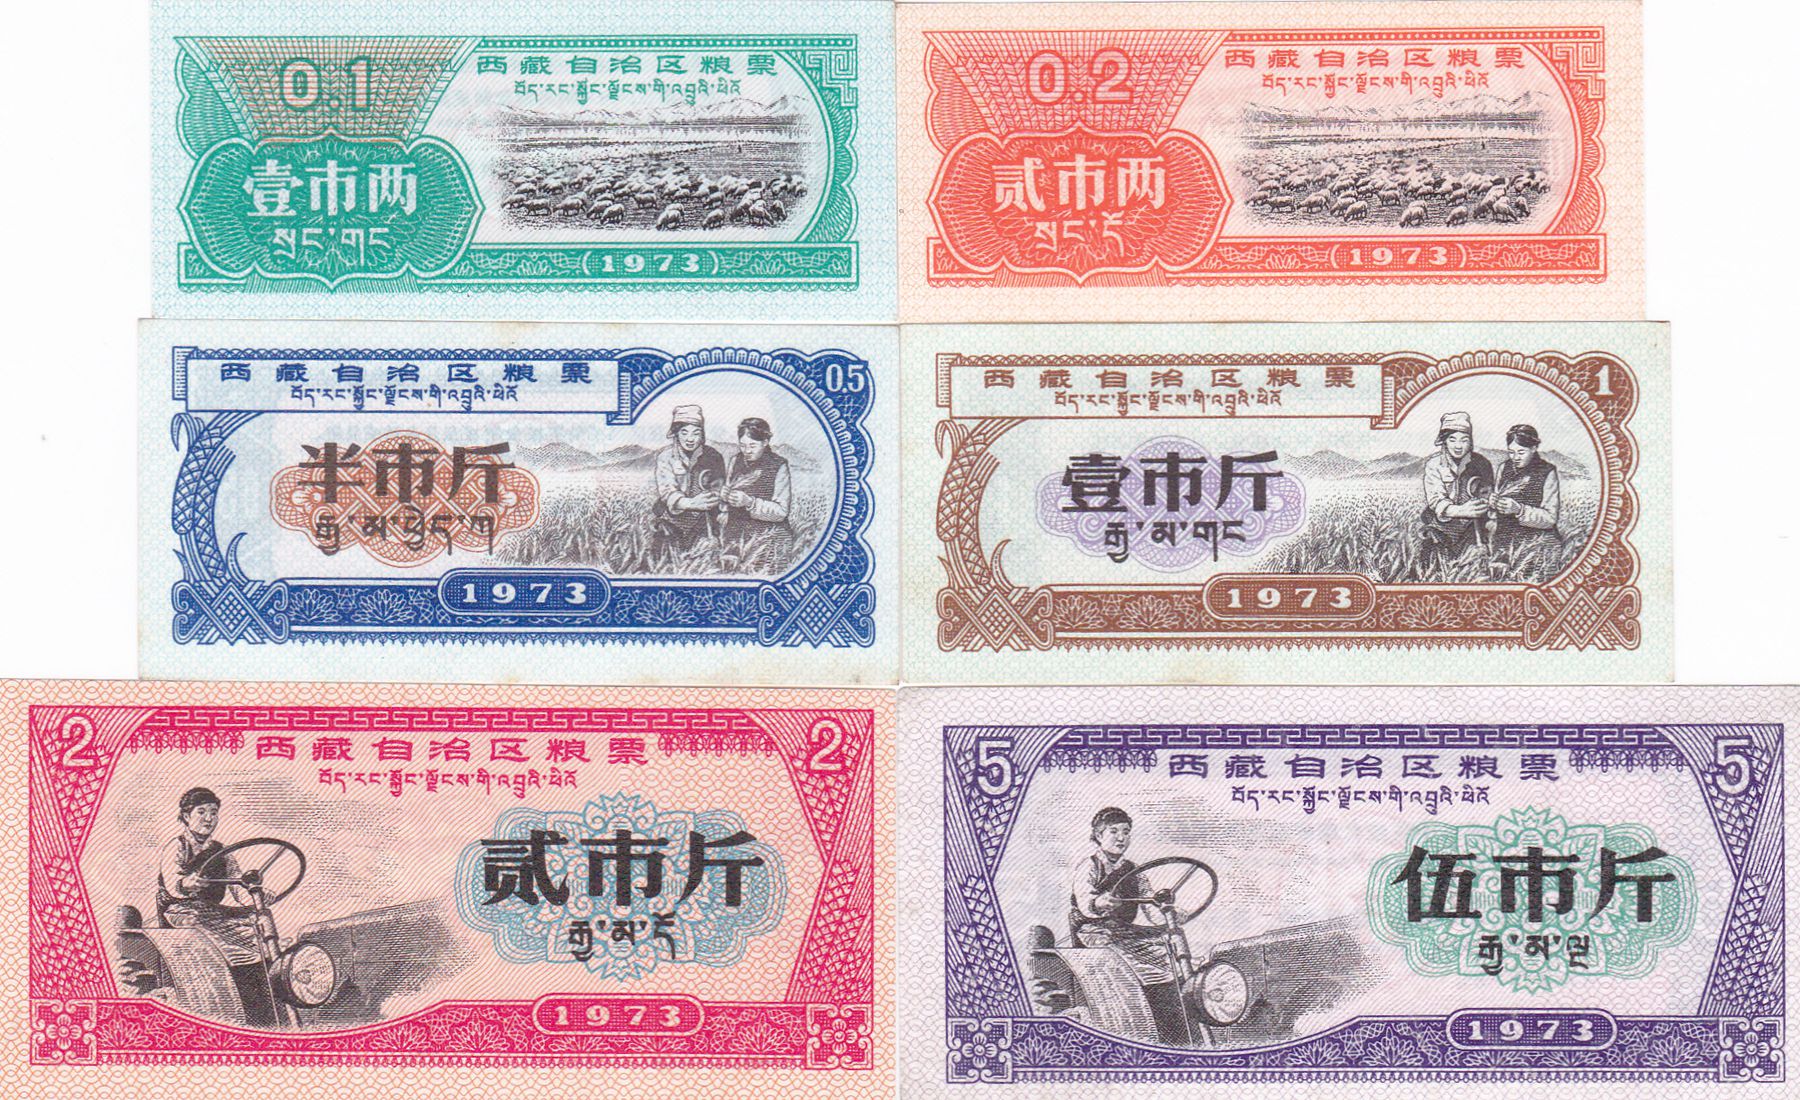 H7025, Tibet Food Ration Coupons, 6 Pcs, 1973 Issue Scarce - Click Image to Close